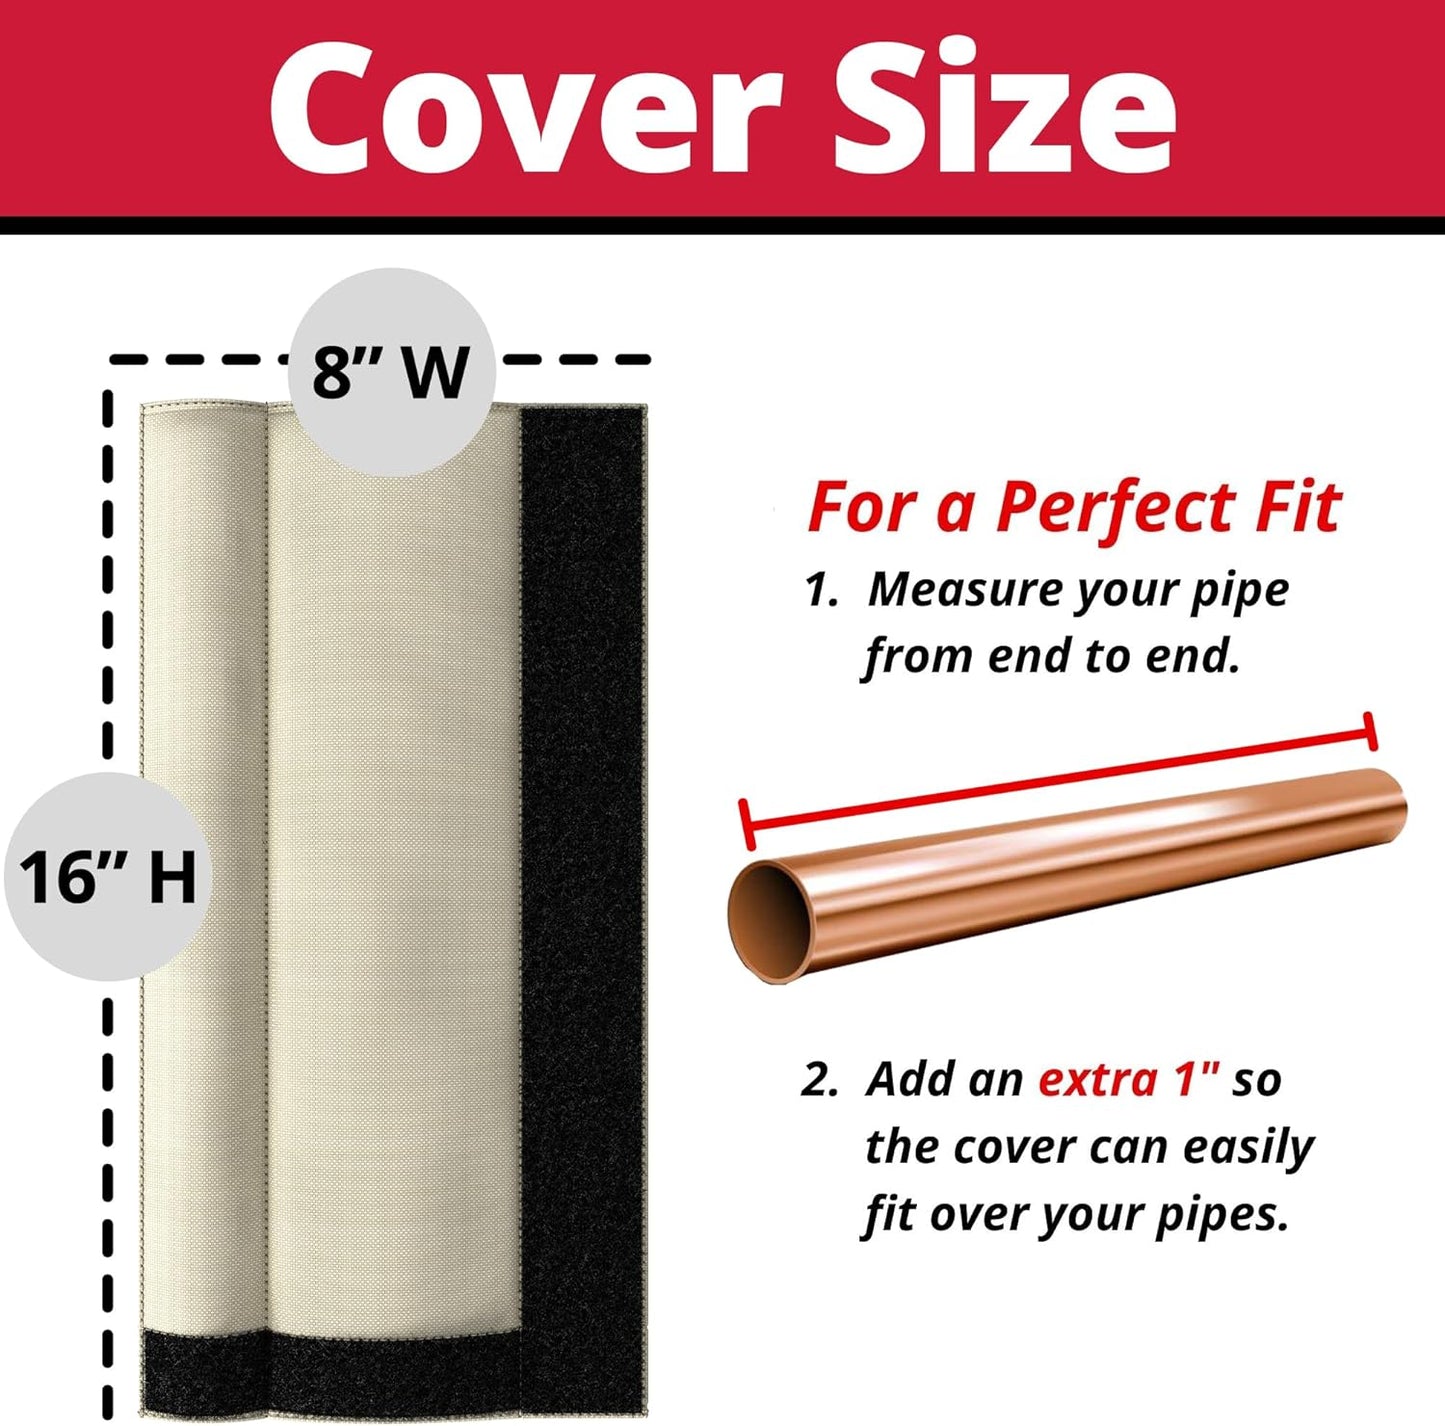 Redford Supply Co. Cold Snap (0°F) Double Wall Cotton Pipe Sleeve Cover - Outdoor Pipe Insulation Cover, Pipe Wrap Insulation, Water Pipe Insulation, Exterior Pipe Insulation Wrap (8"W x 16"H, Beige)